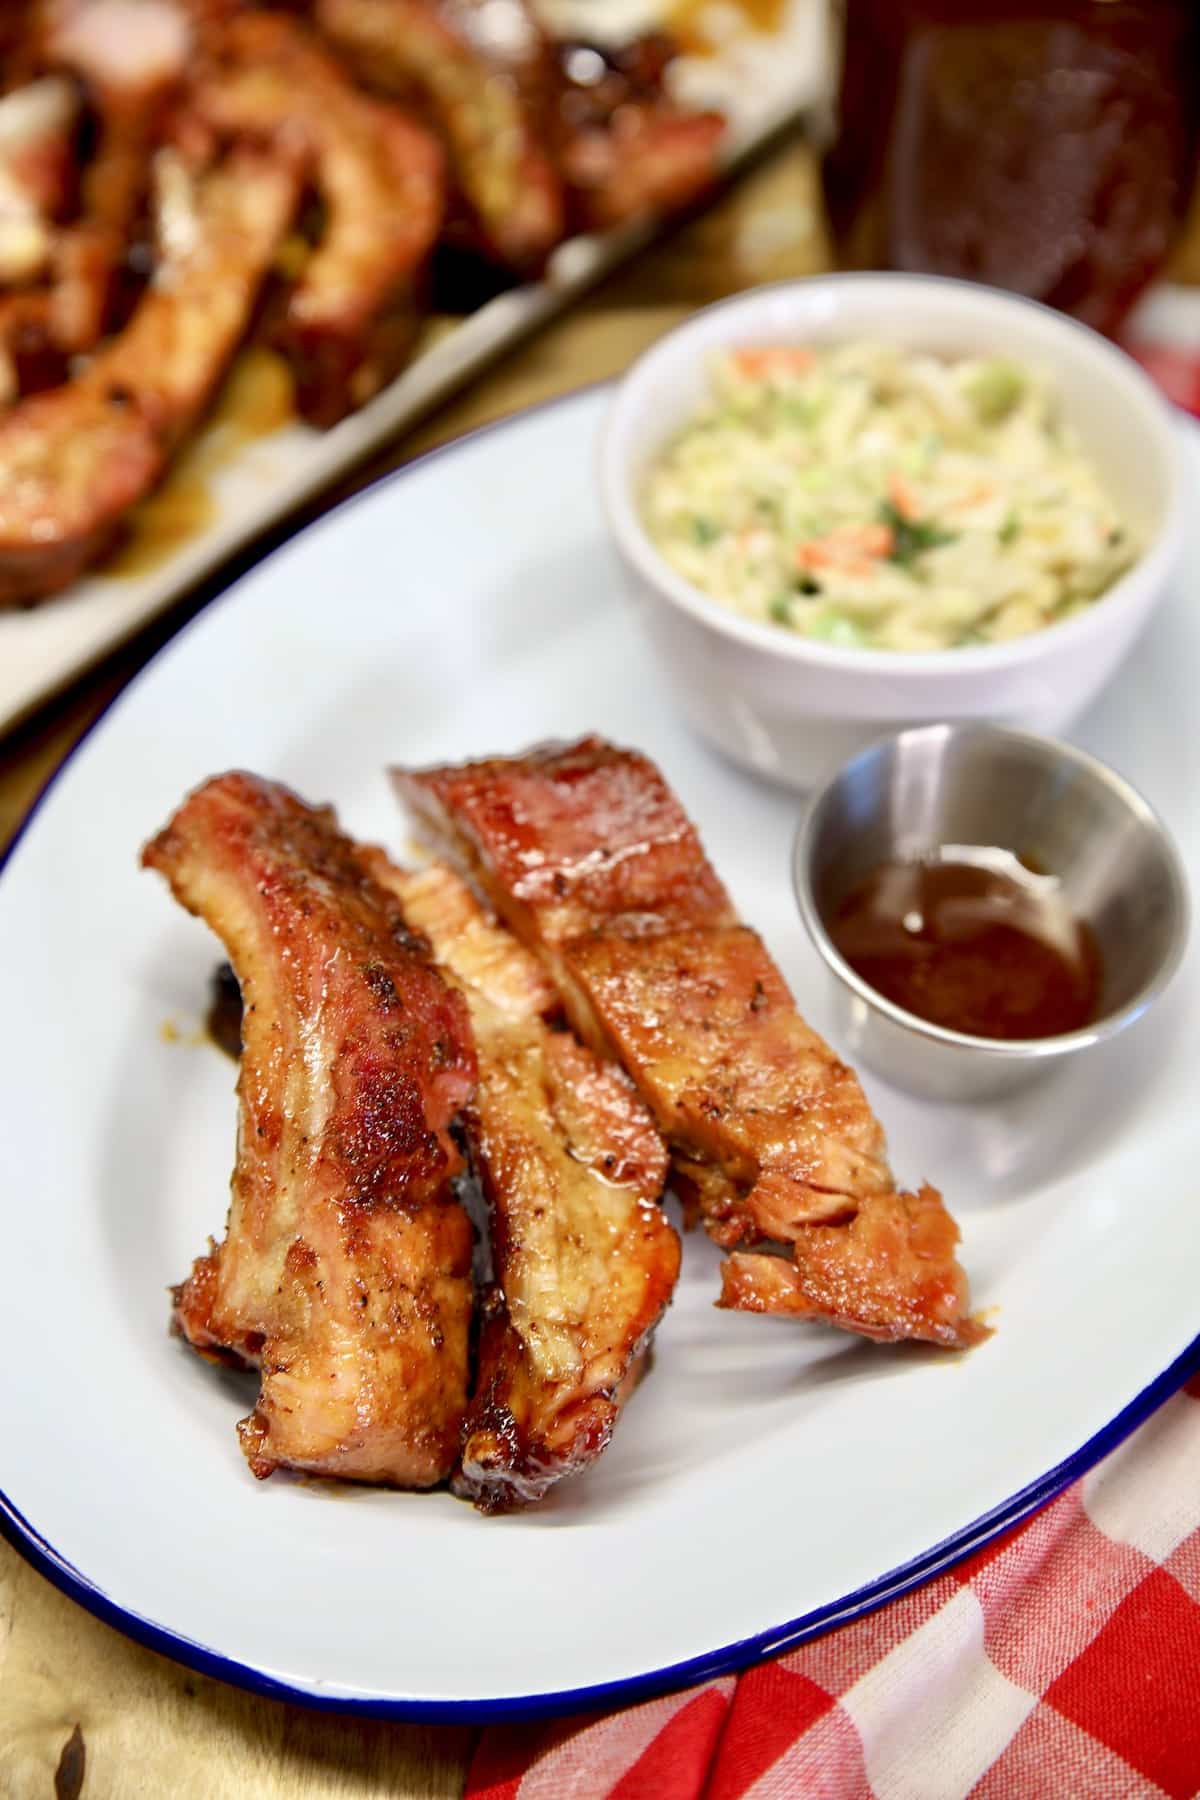 Honey garlic baby back ribs on a platter with sauce and slaw.